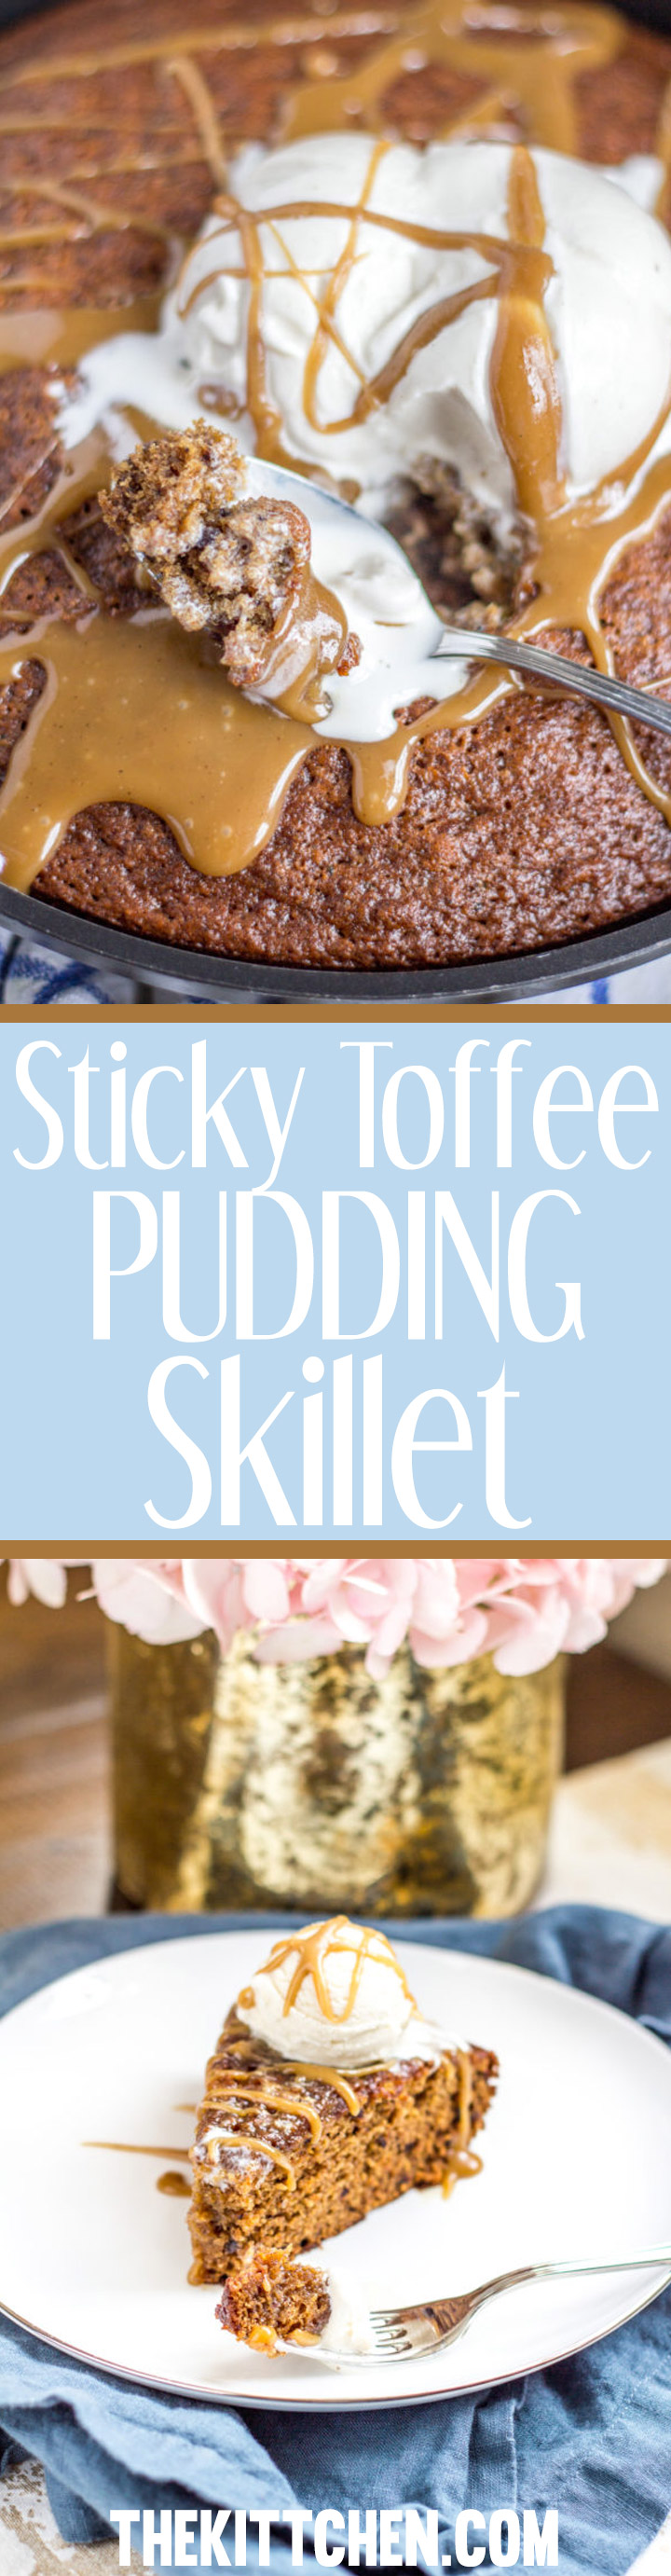 An easy recipe for a Sticky Toffee Pudding Skillet - an American twist on Sticky Toffee Pudding